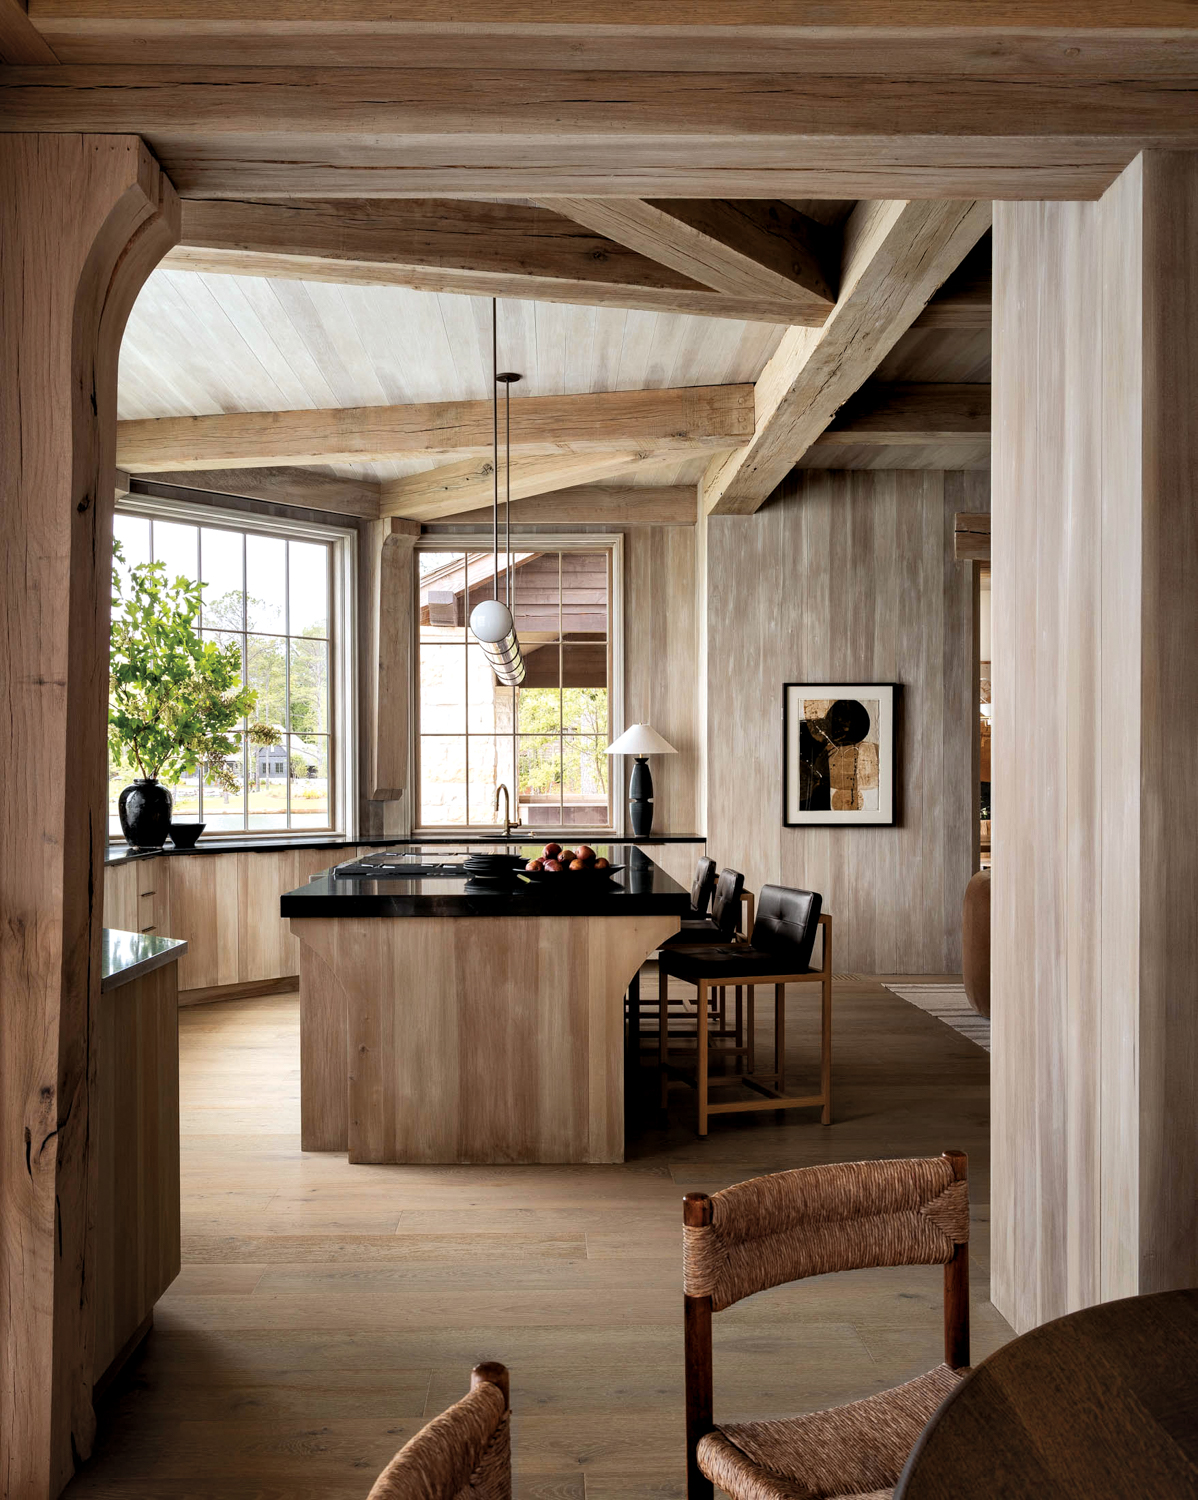 Light wood floors, walls and beamed ceilings in an open layout kitchen